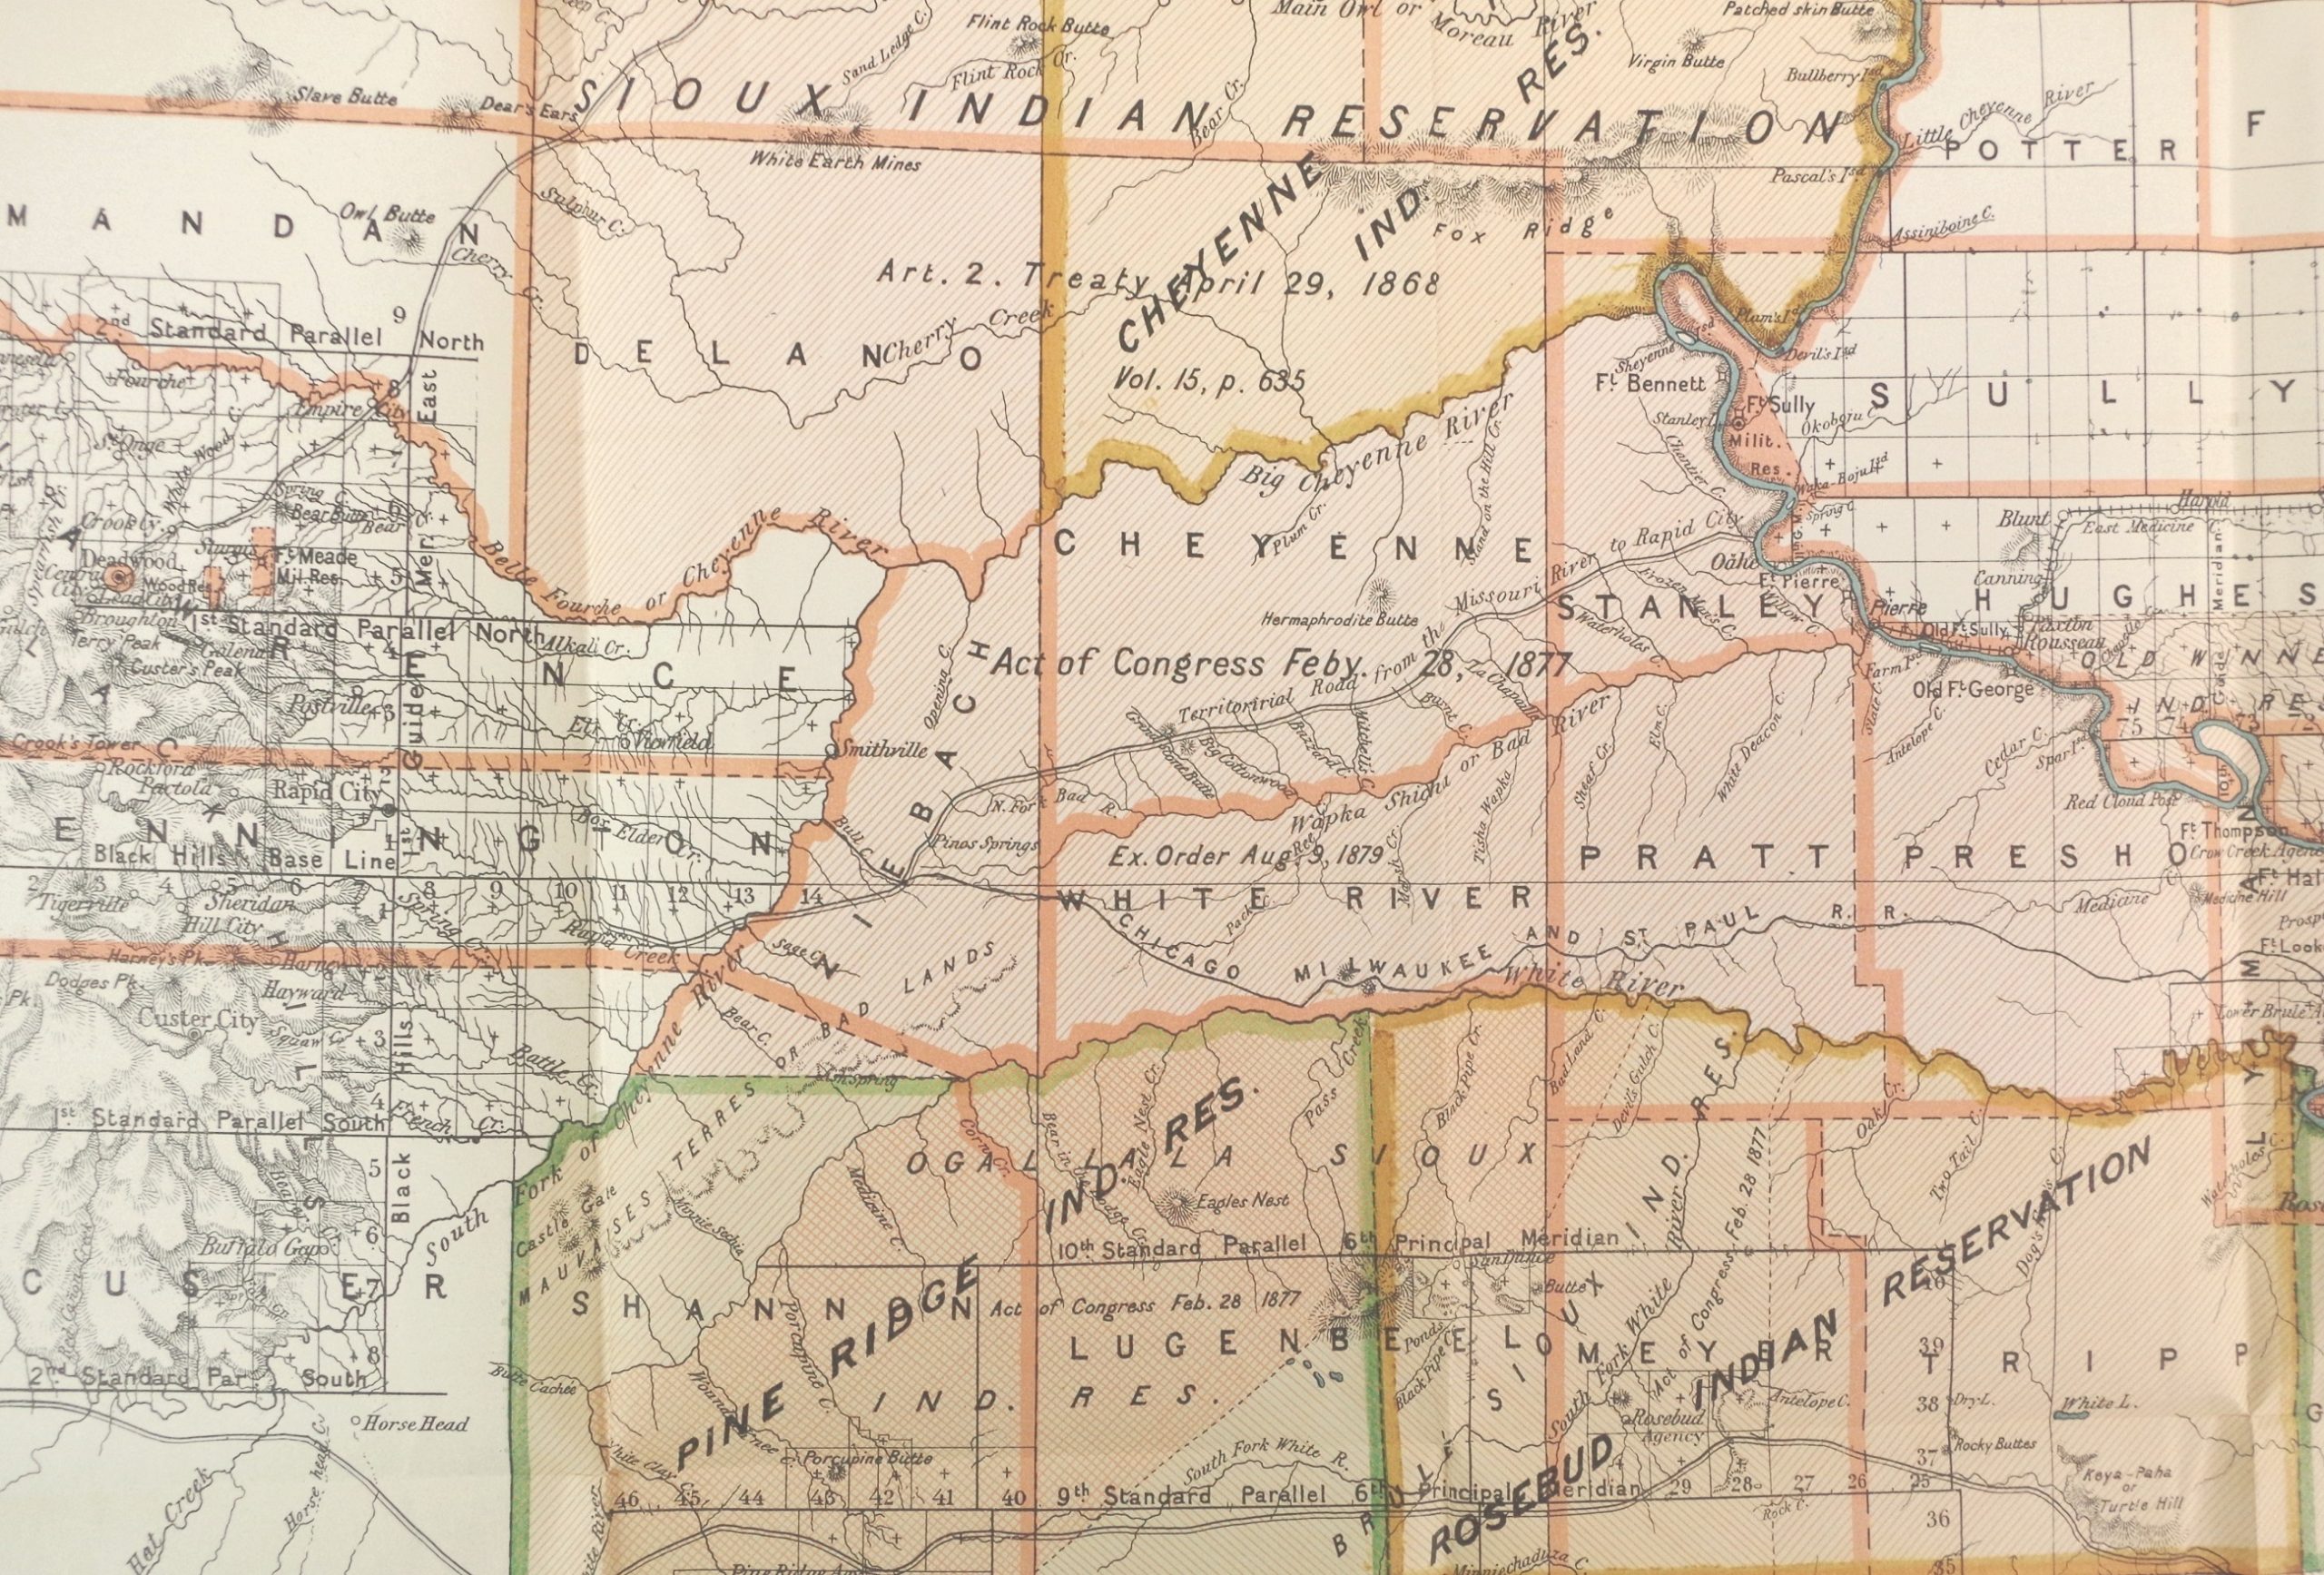 Detail of map showing Act of Congress Feb 1877